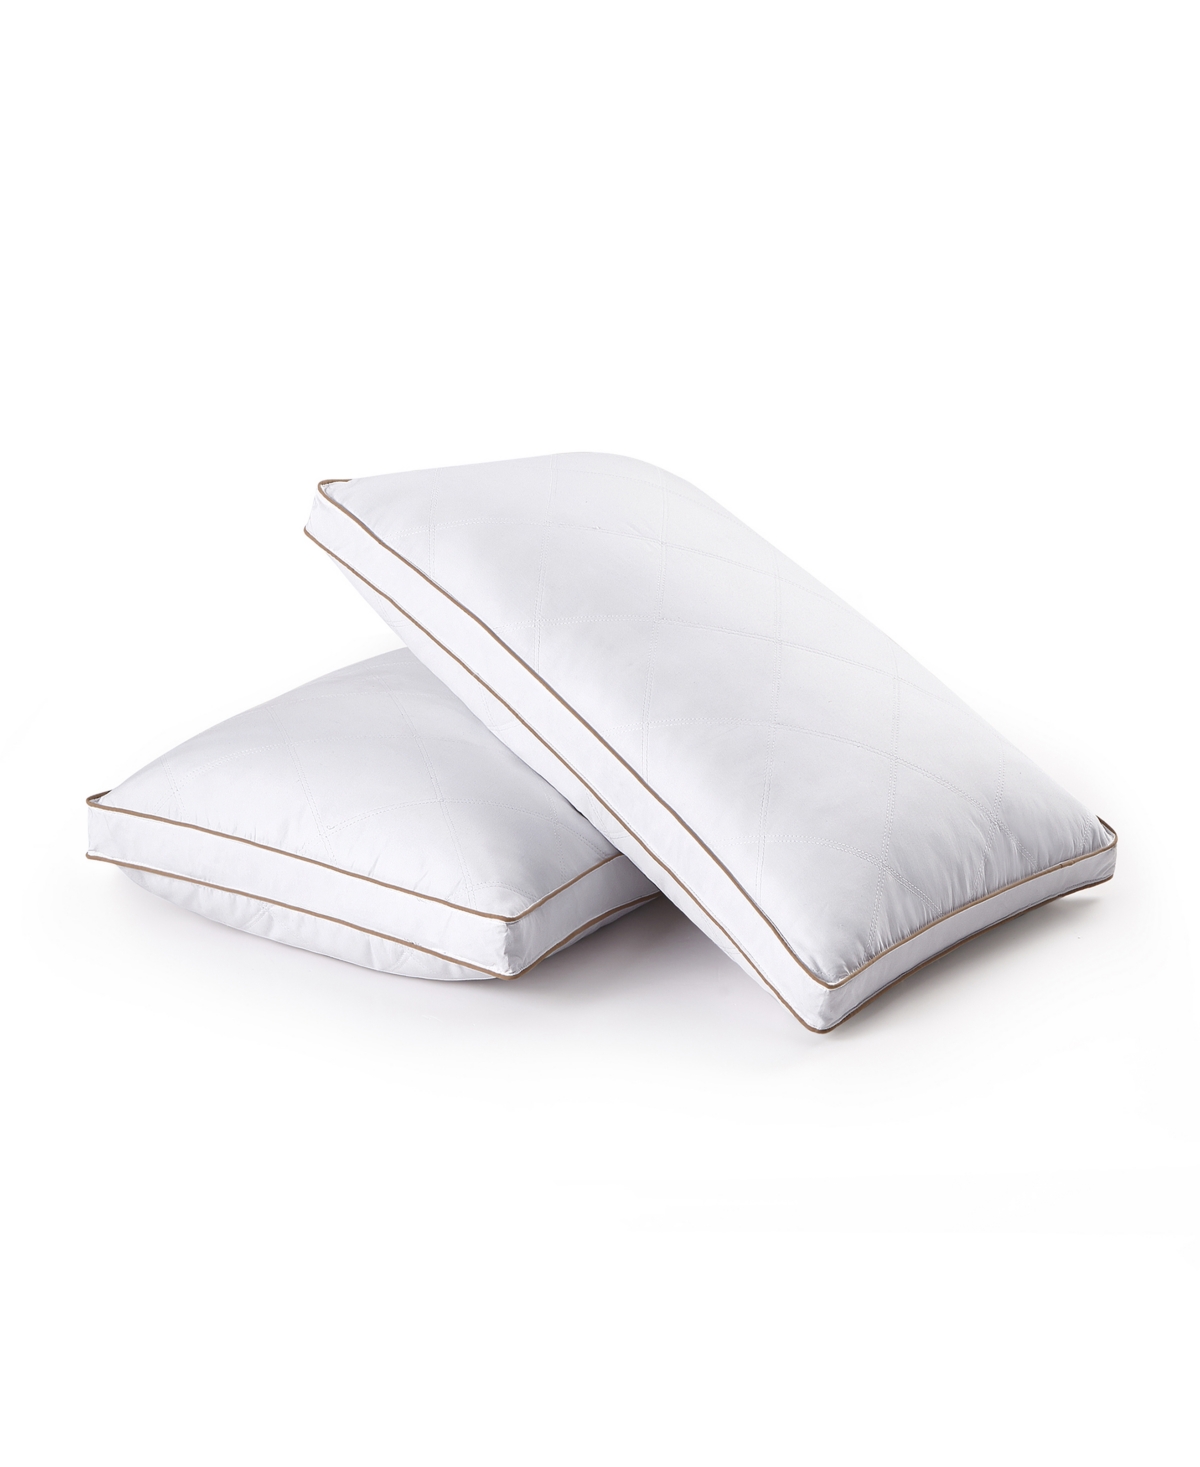 Unikome 2 Piece Diamond Quilted Goose Feather Gusseted Bed Pillows Set Collection In White